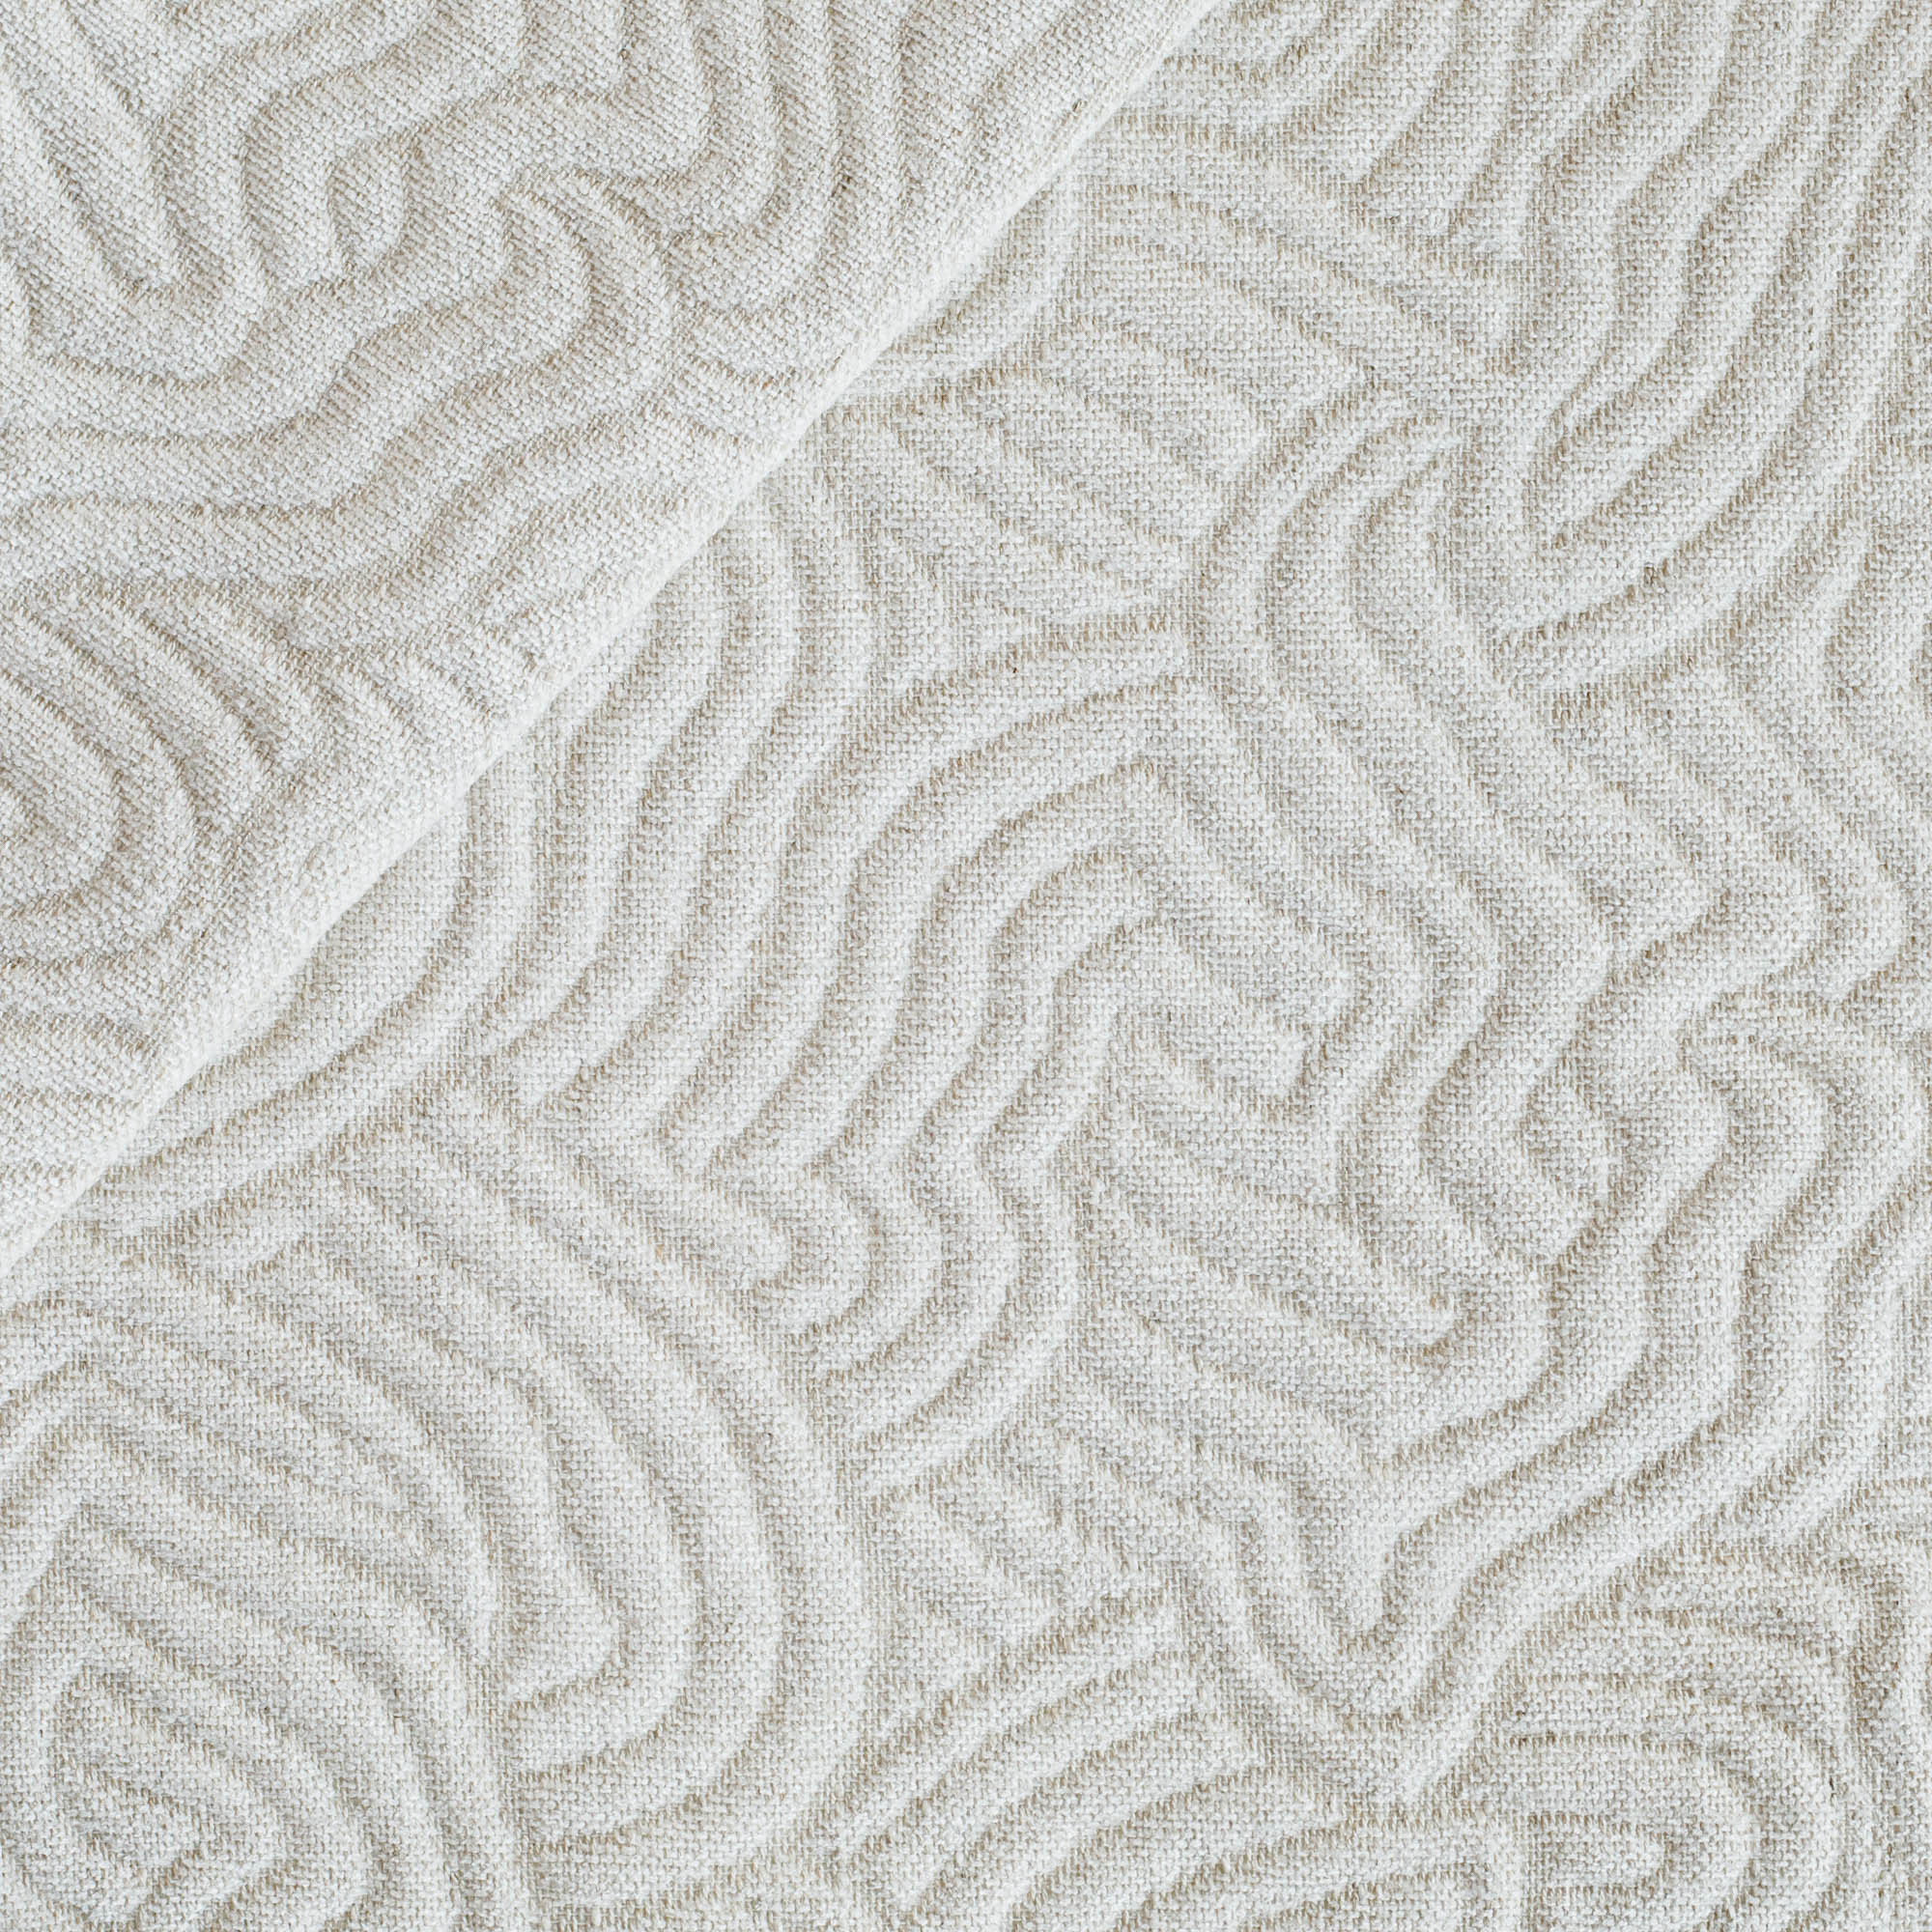 Quince Pearl Fabric, a cream quilted abstract floral patterned upholstery fabric from Tonic Living